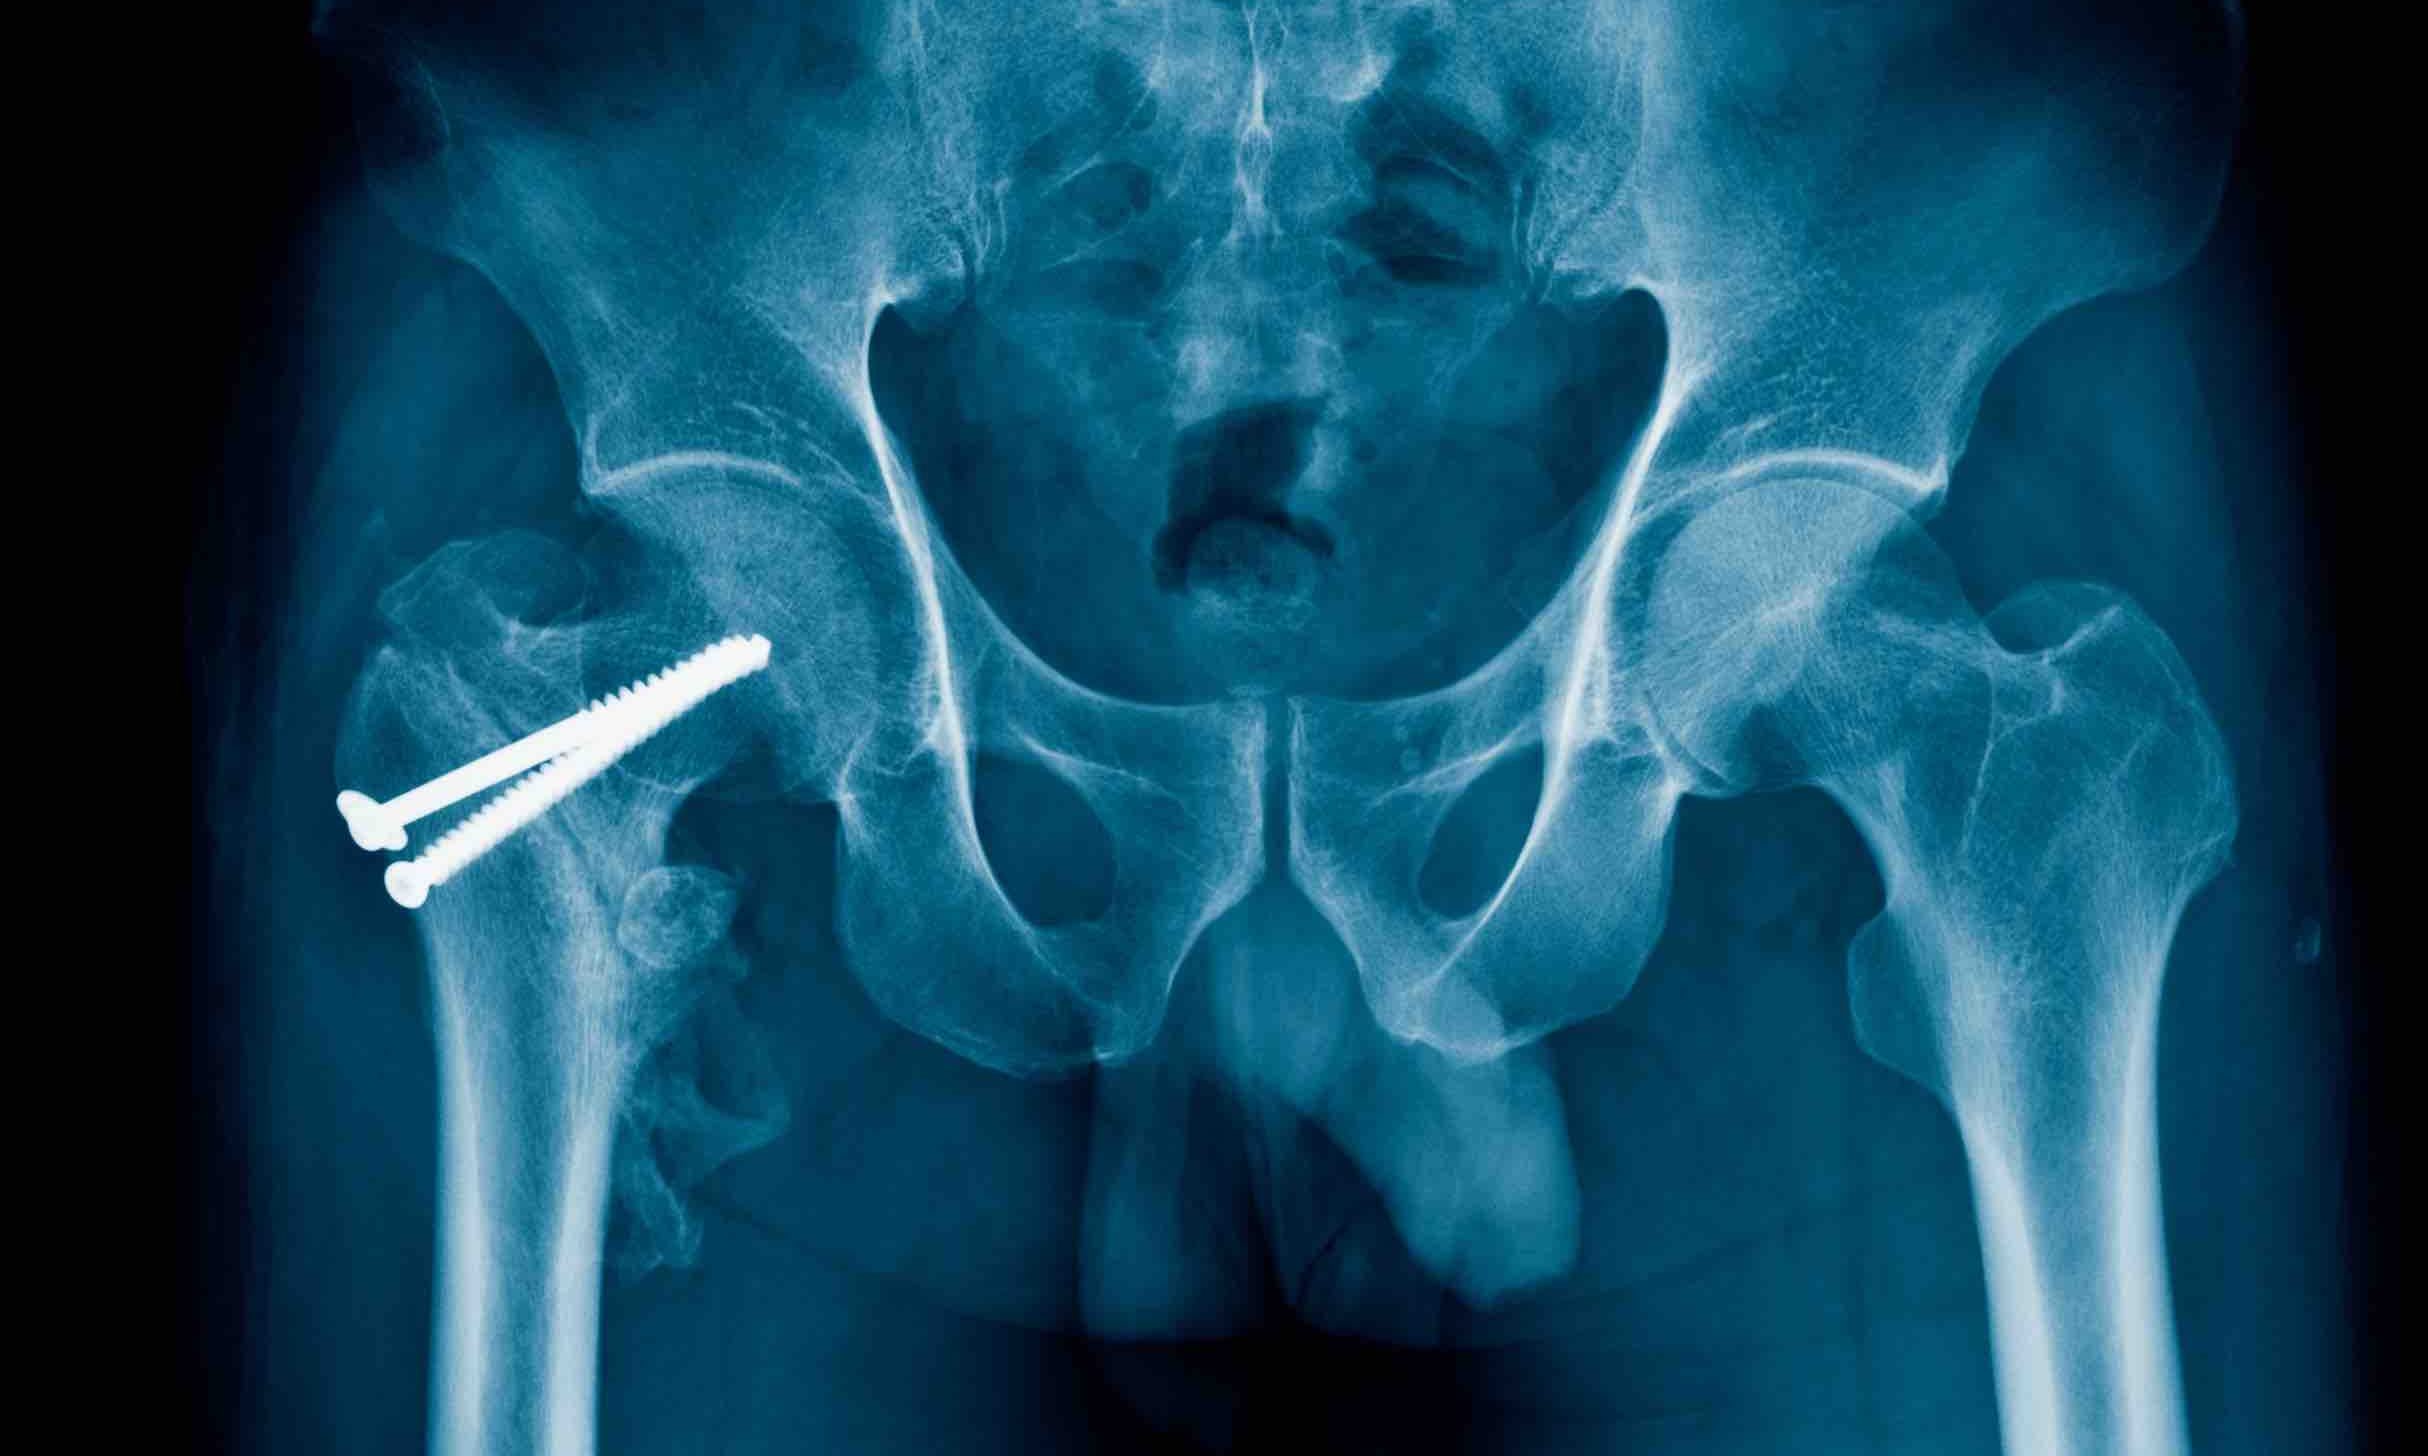 A Novel Technique for the Removal of an Intramedullary Femoral Guidewire  Lodged in the Femoral Canal | Published in Spartan Medical Research Journal